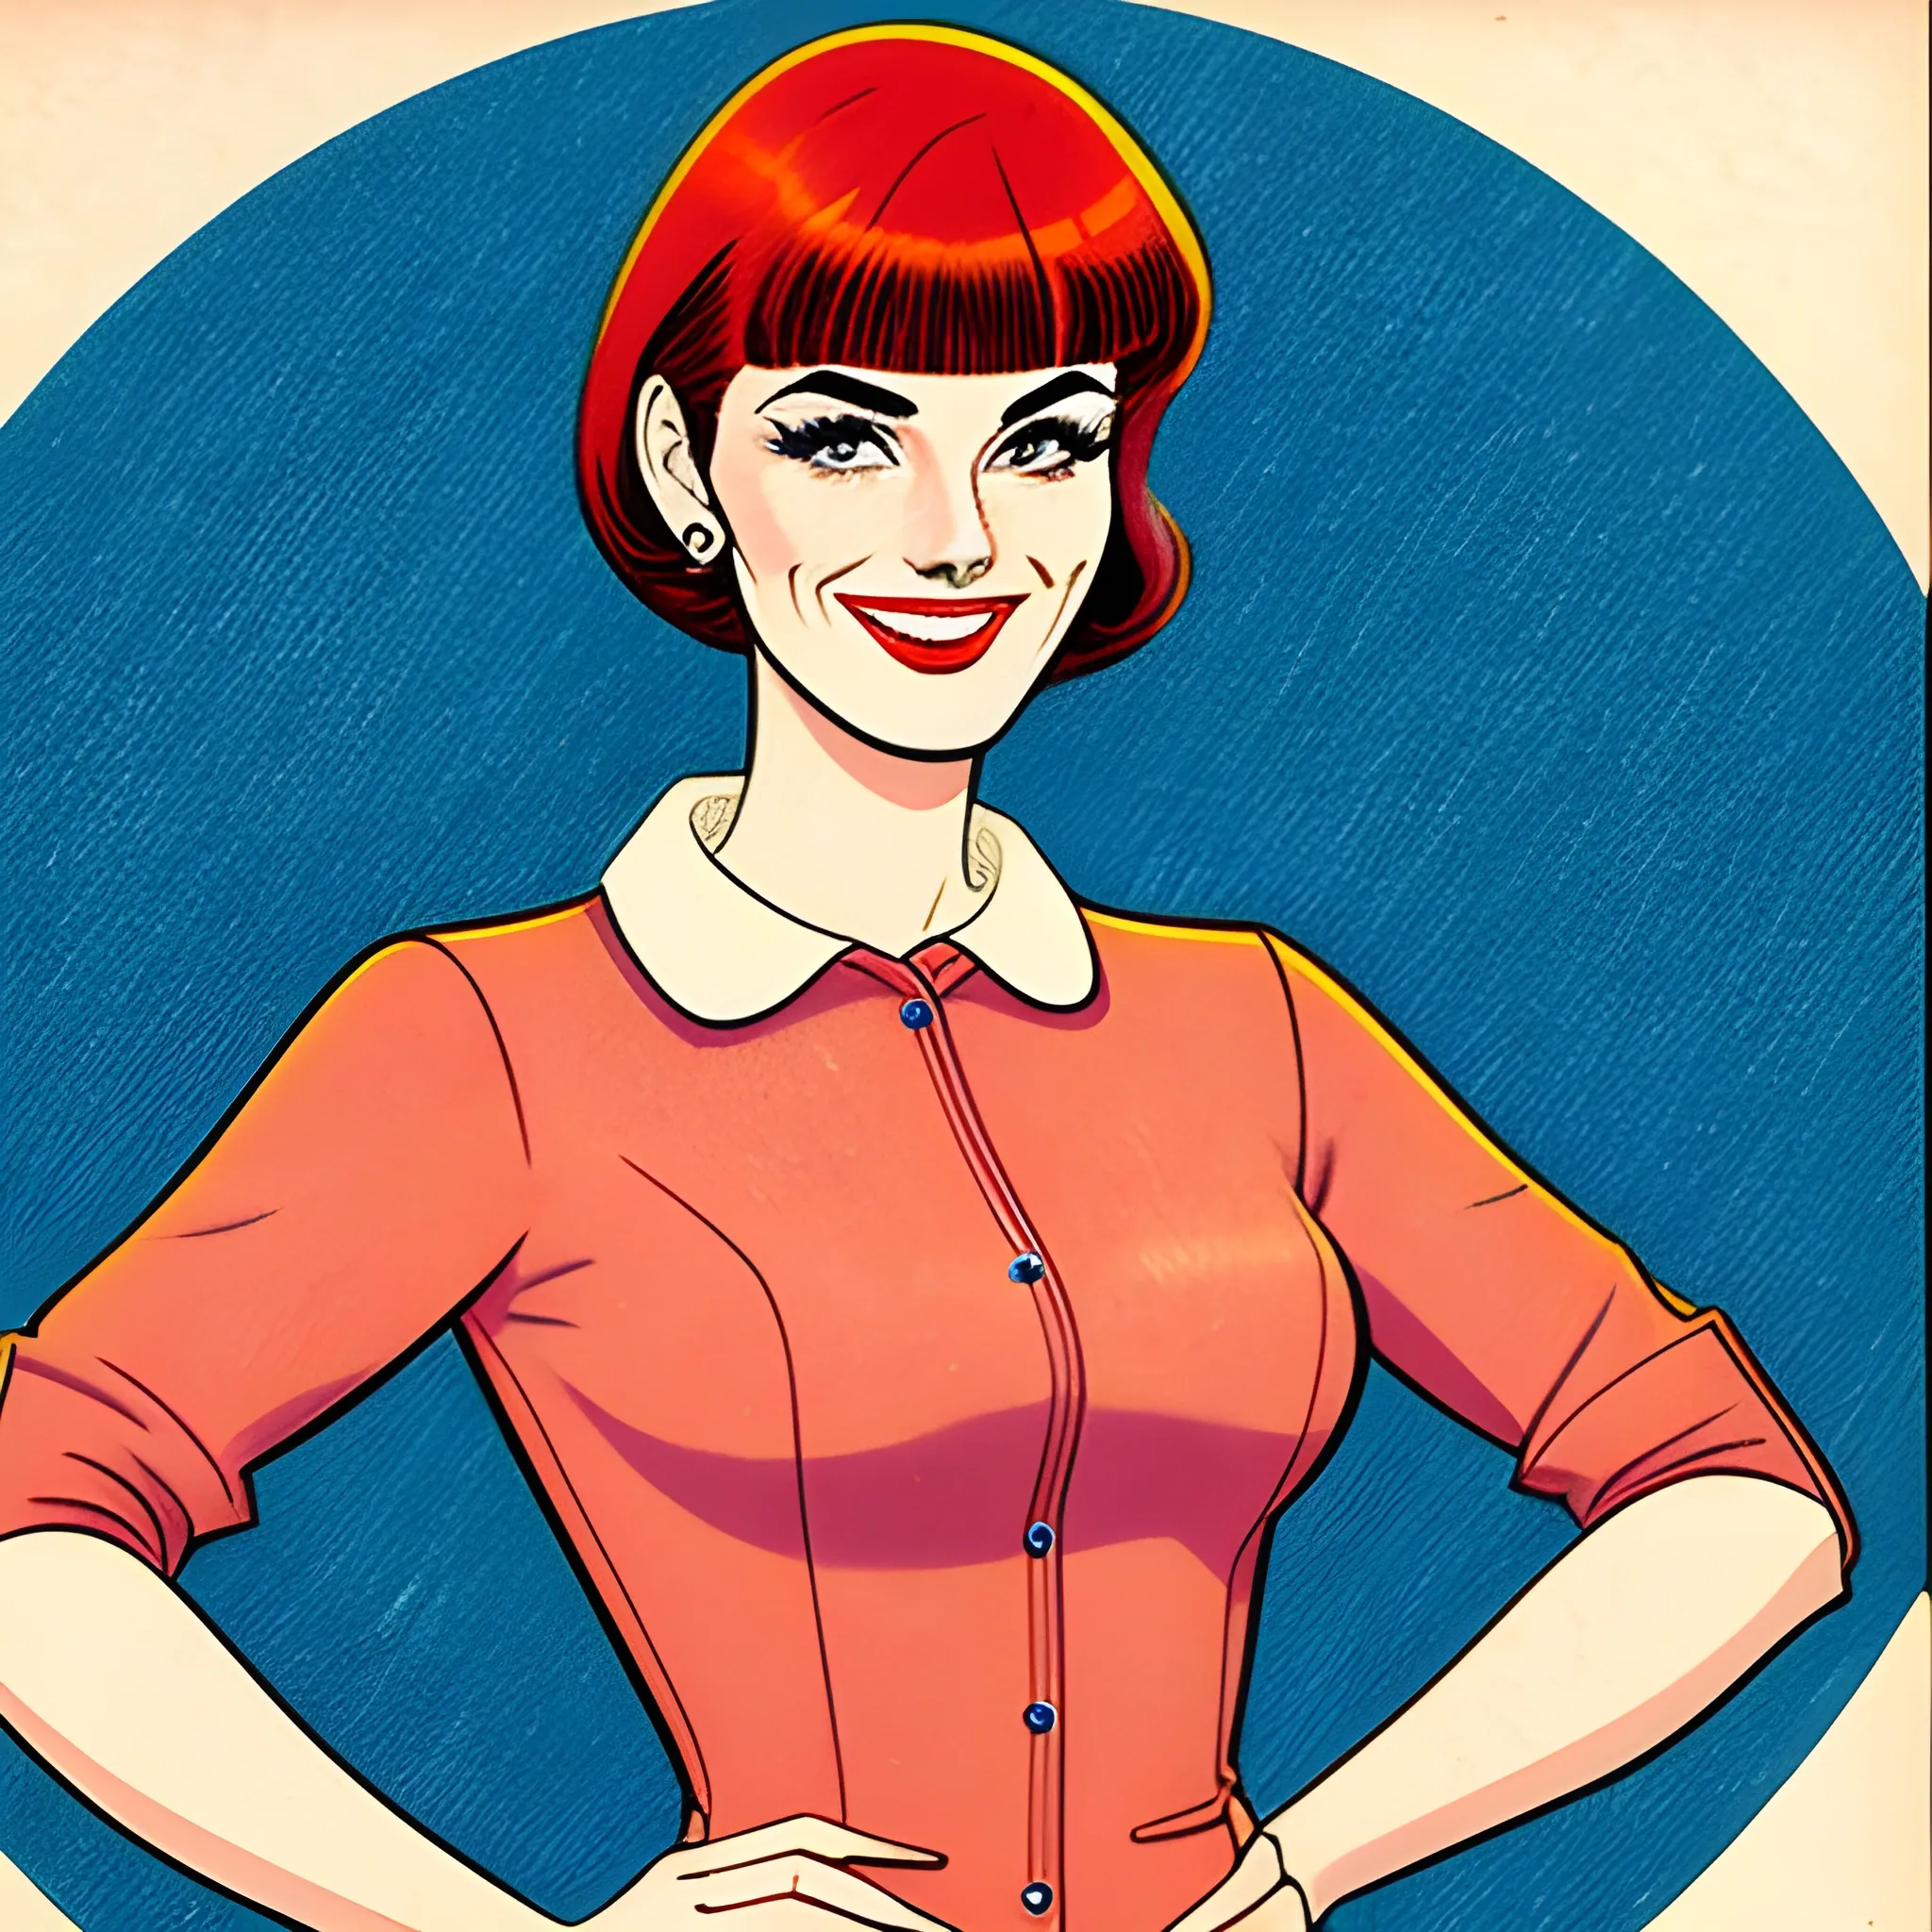 short haired, reddish brownhiaar, college girl with bangs, wearing 1960's clothing, early 20's, smiling, drawn in Jean Giraud art style, full body shots